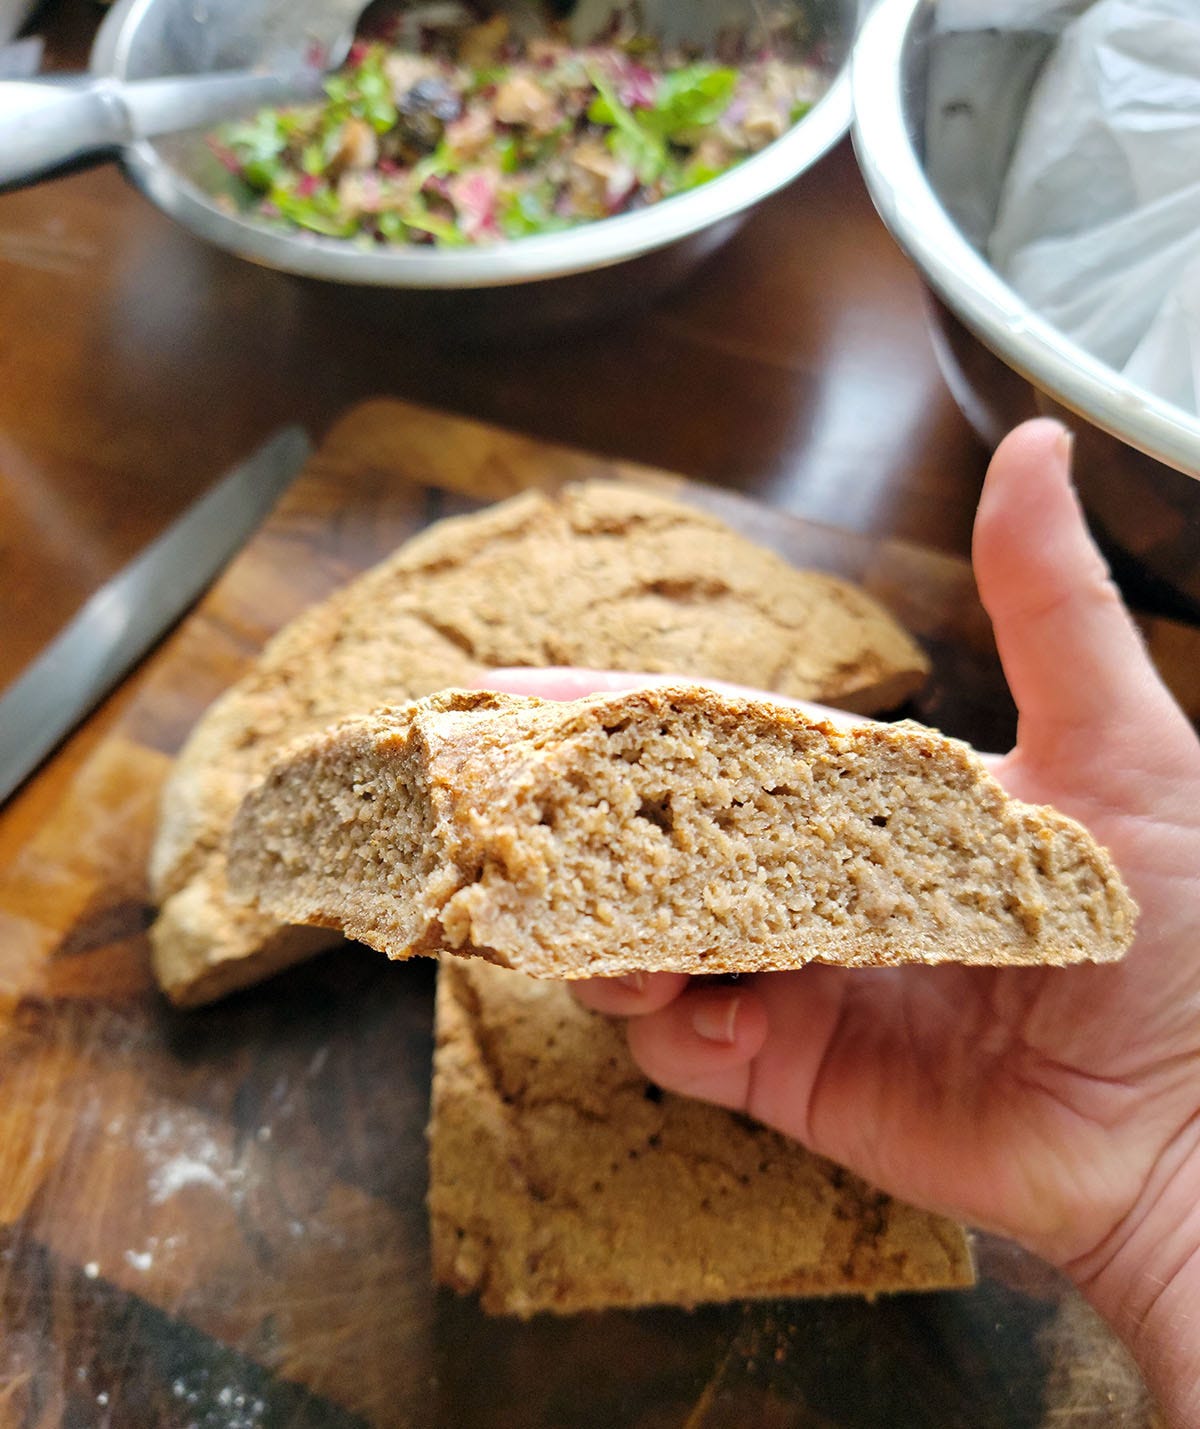 A slice of Finnish rye bread, showing the crumb.